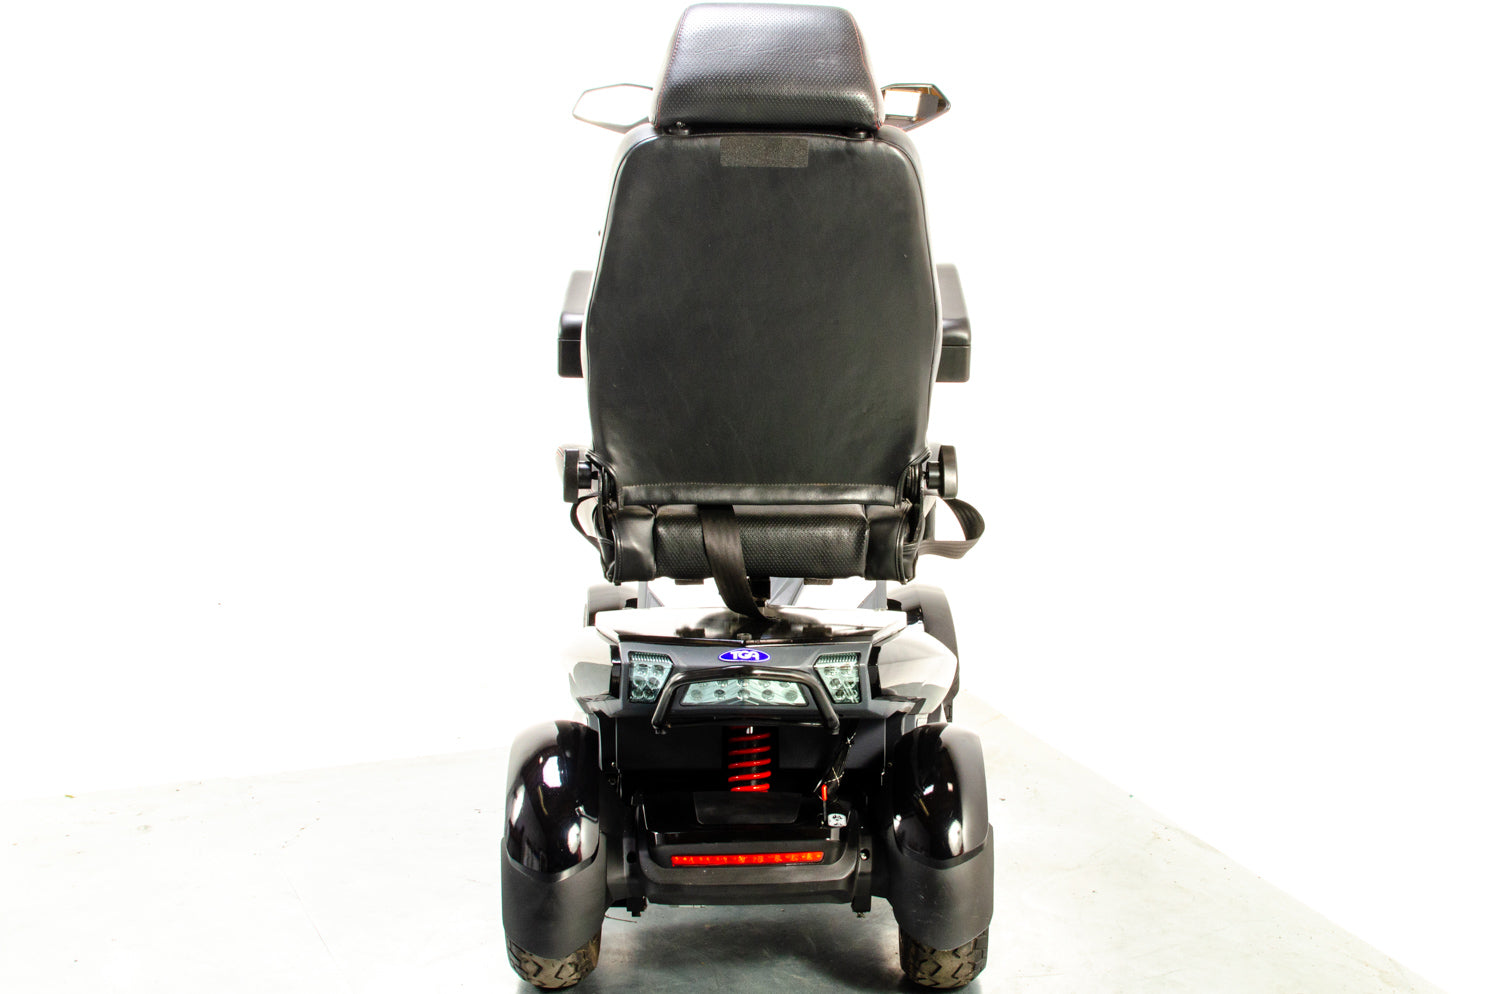 TGA Vita Sport Used Mobility Scooter 8mph All-Terrain Large Road Legal Bucket Seat